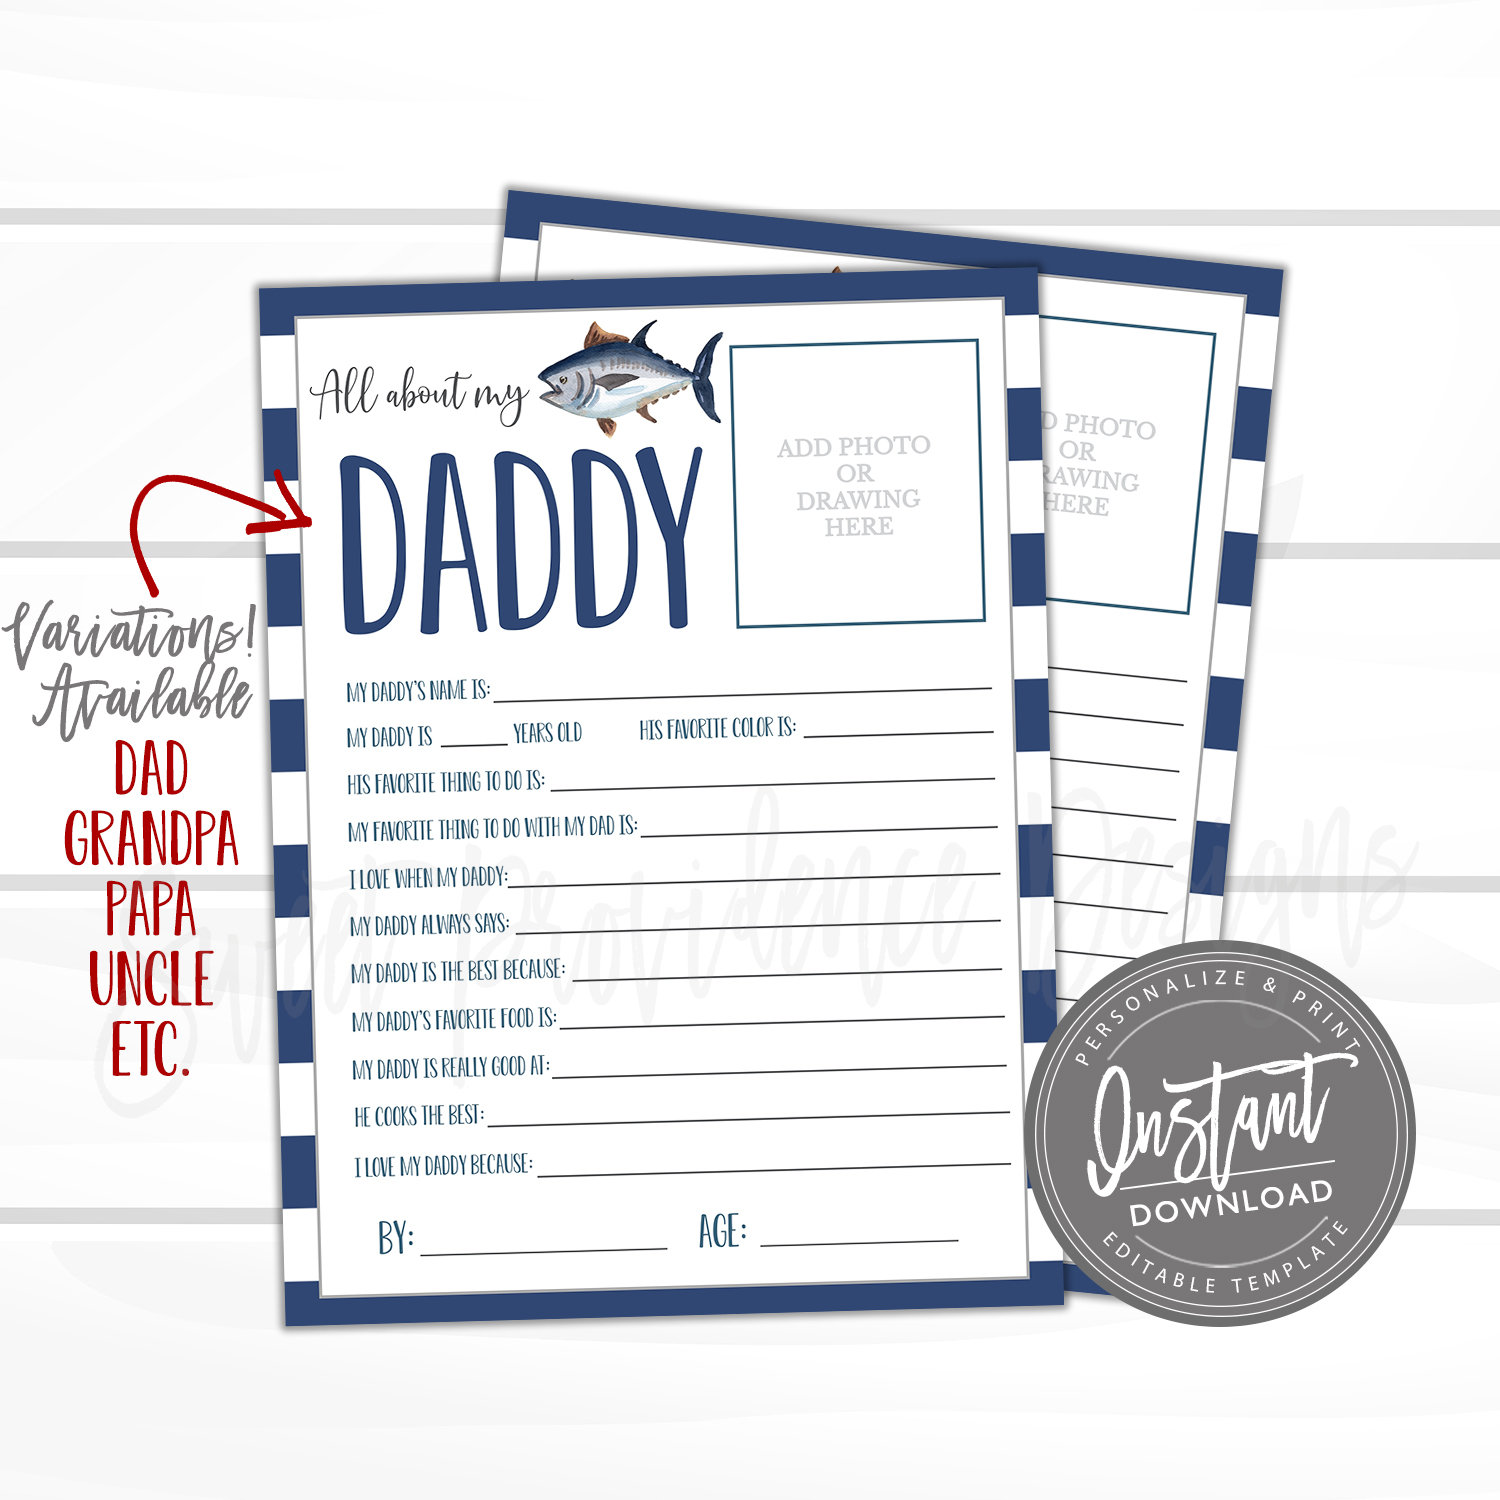 Download Fathers Day Questionnaire Survey Father S Day Gift All About Daddy Editable Questions For Kids Grandpa Uncle Present Edit Now Sweet Providence Designs